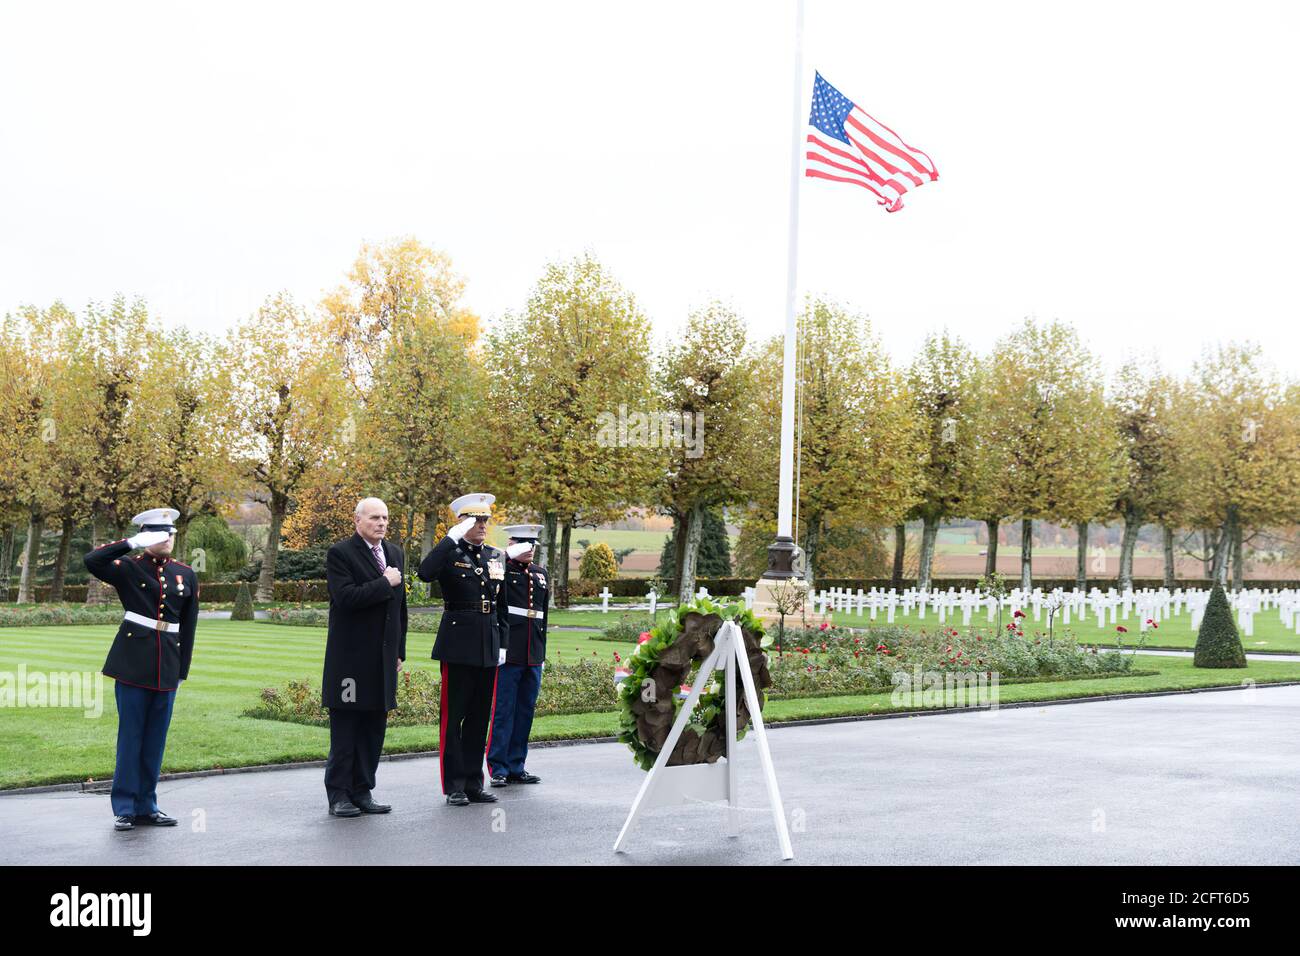 The Aisne-Marne American Cemetery and Memorial White House Chief of Staff General john Kelly and Chairman of the Joint Chiefs of Staff General Joseph F. Dunford, joined by their wives Karen Kelly and Ellyn Dunford, visiting the Aisne-Marne American Cemetery and Memorial Saturday. Nov 10, 2018, in. Belleau, France. Stock Photo